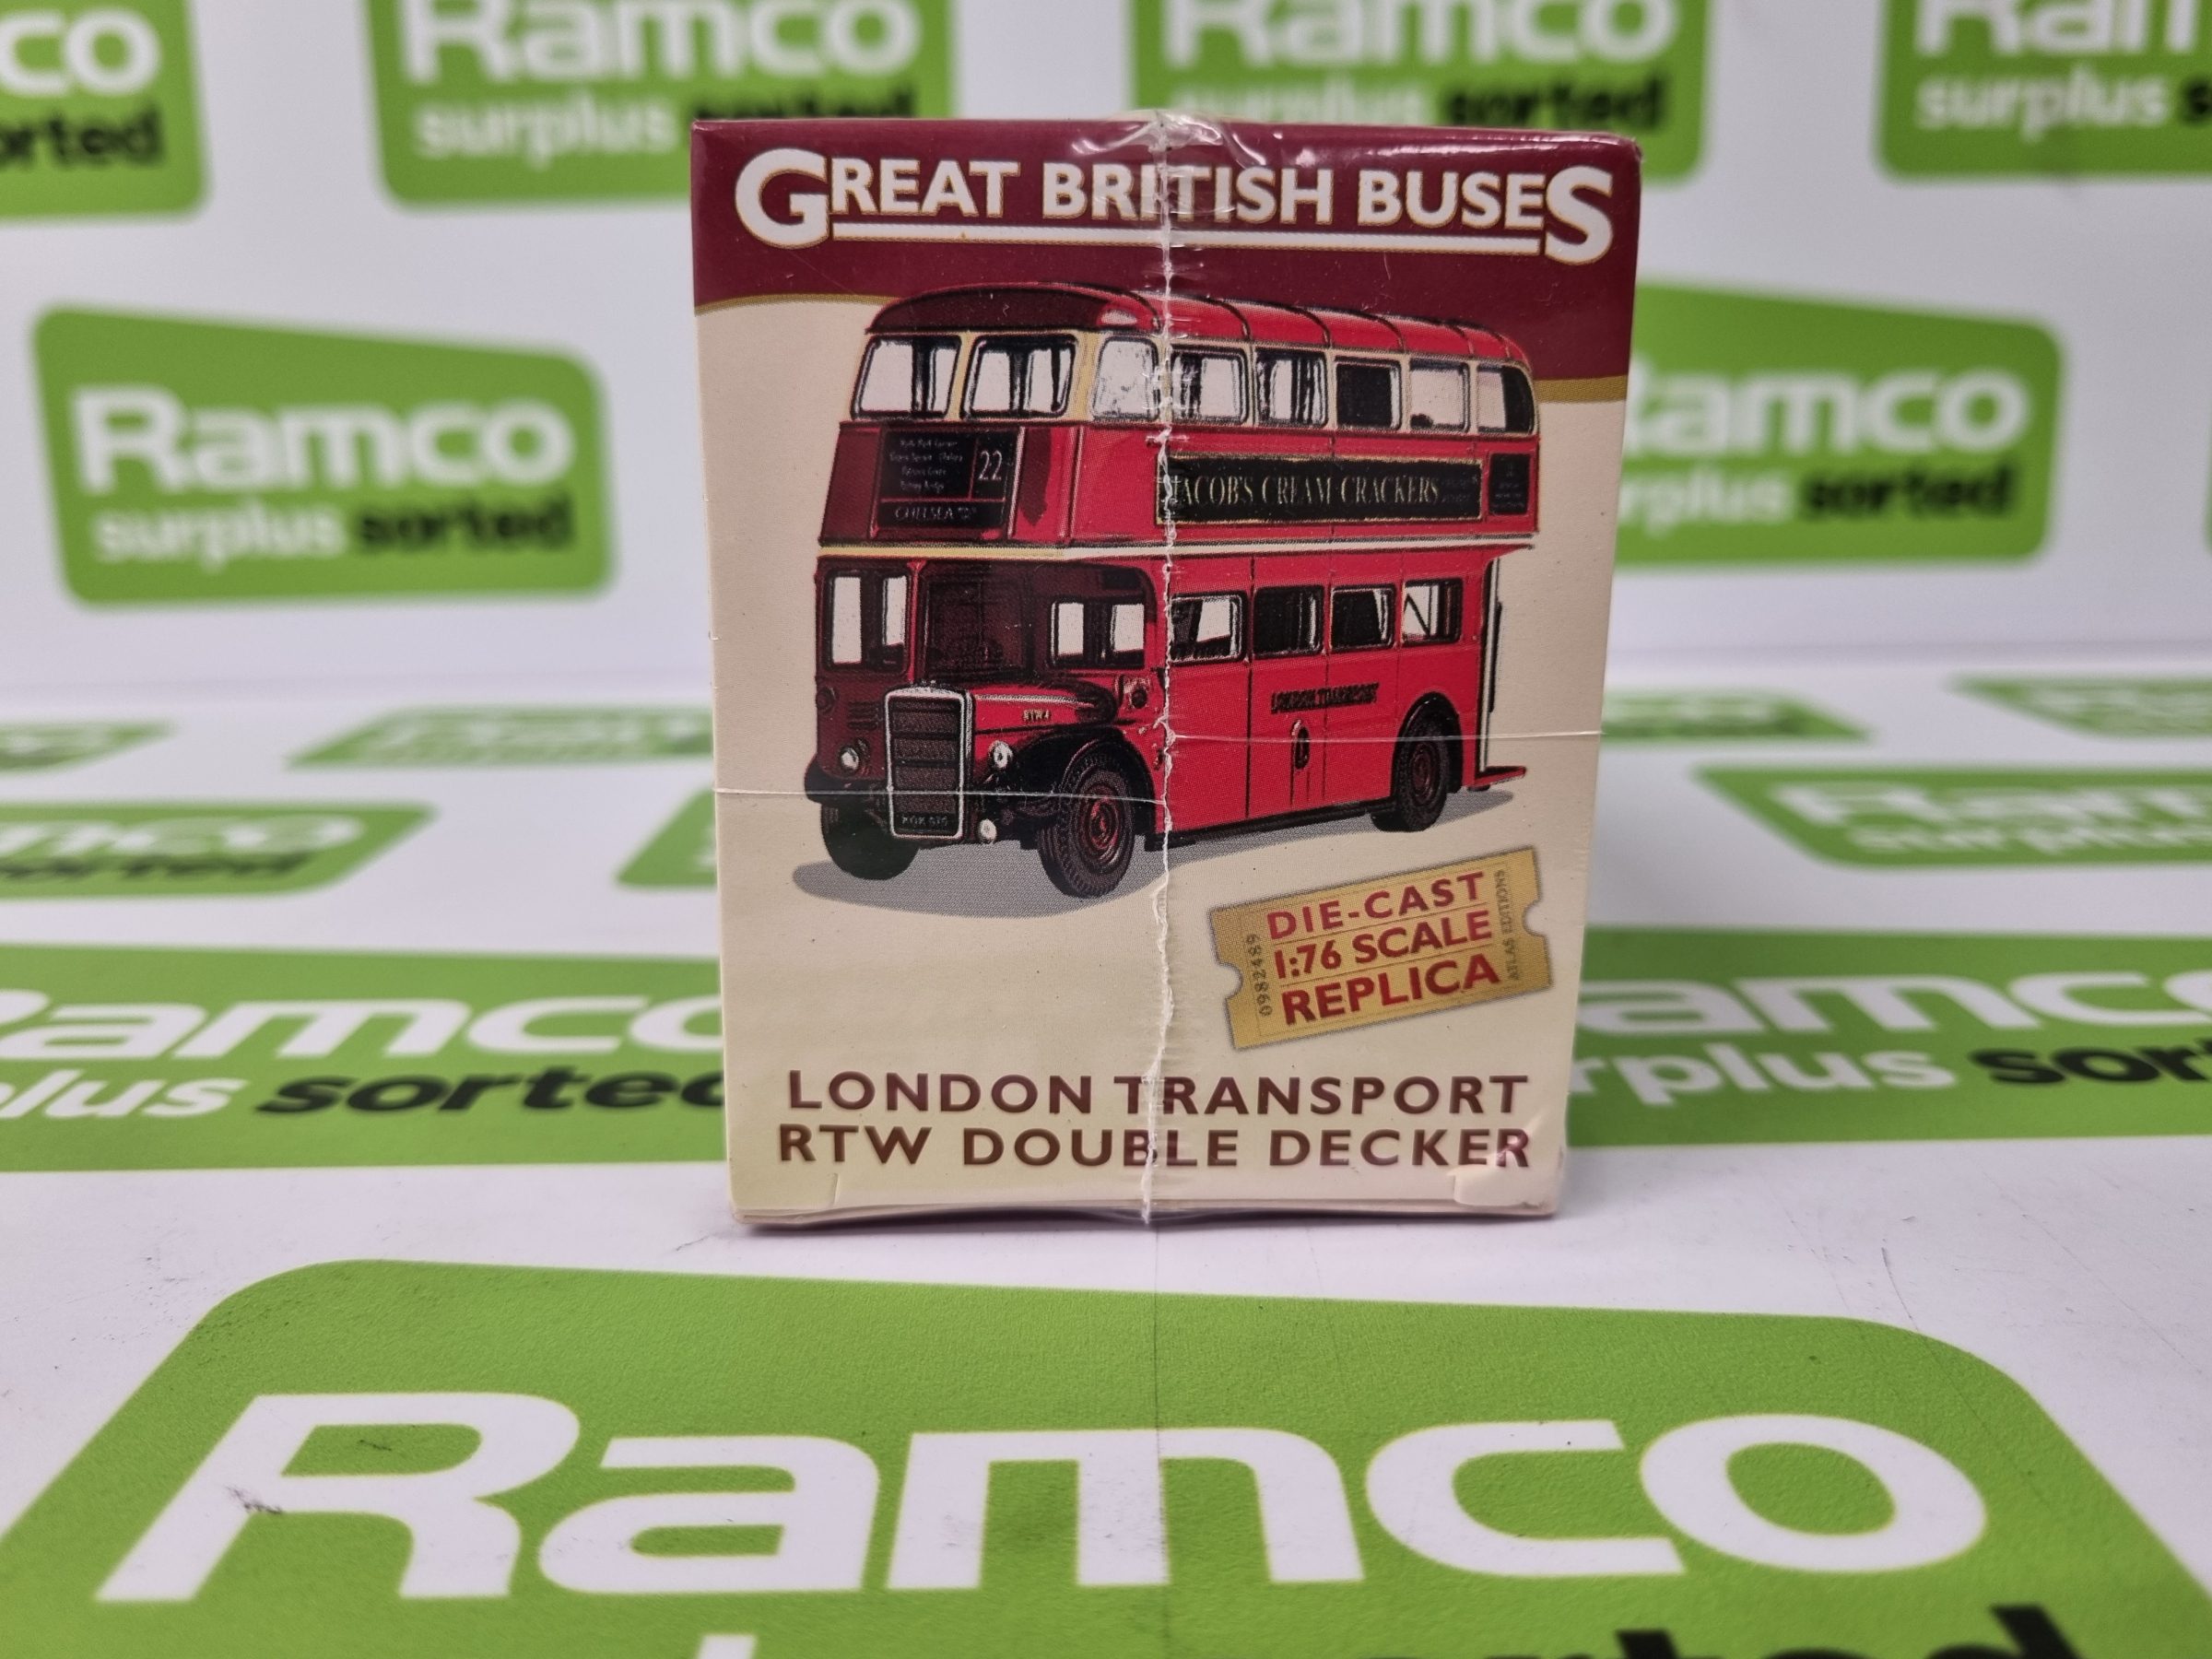 Great British Buses - London Transport RTW Double Decker - 1:76 scale model - Image 4 of 6